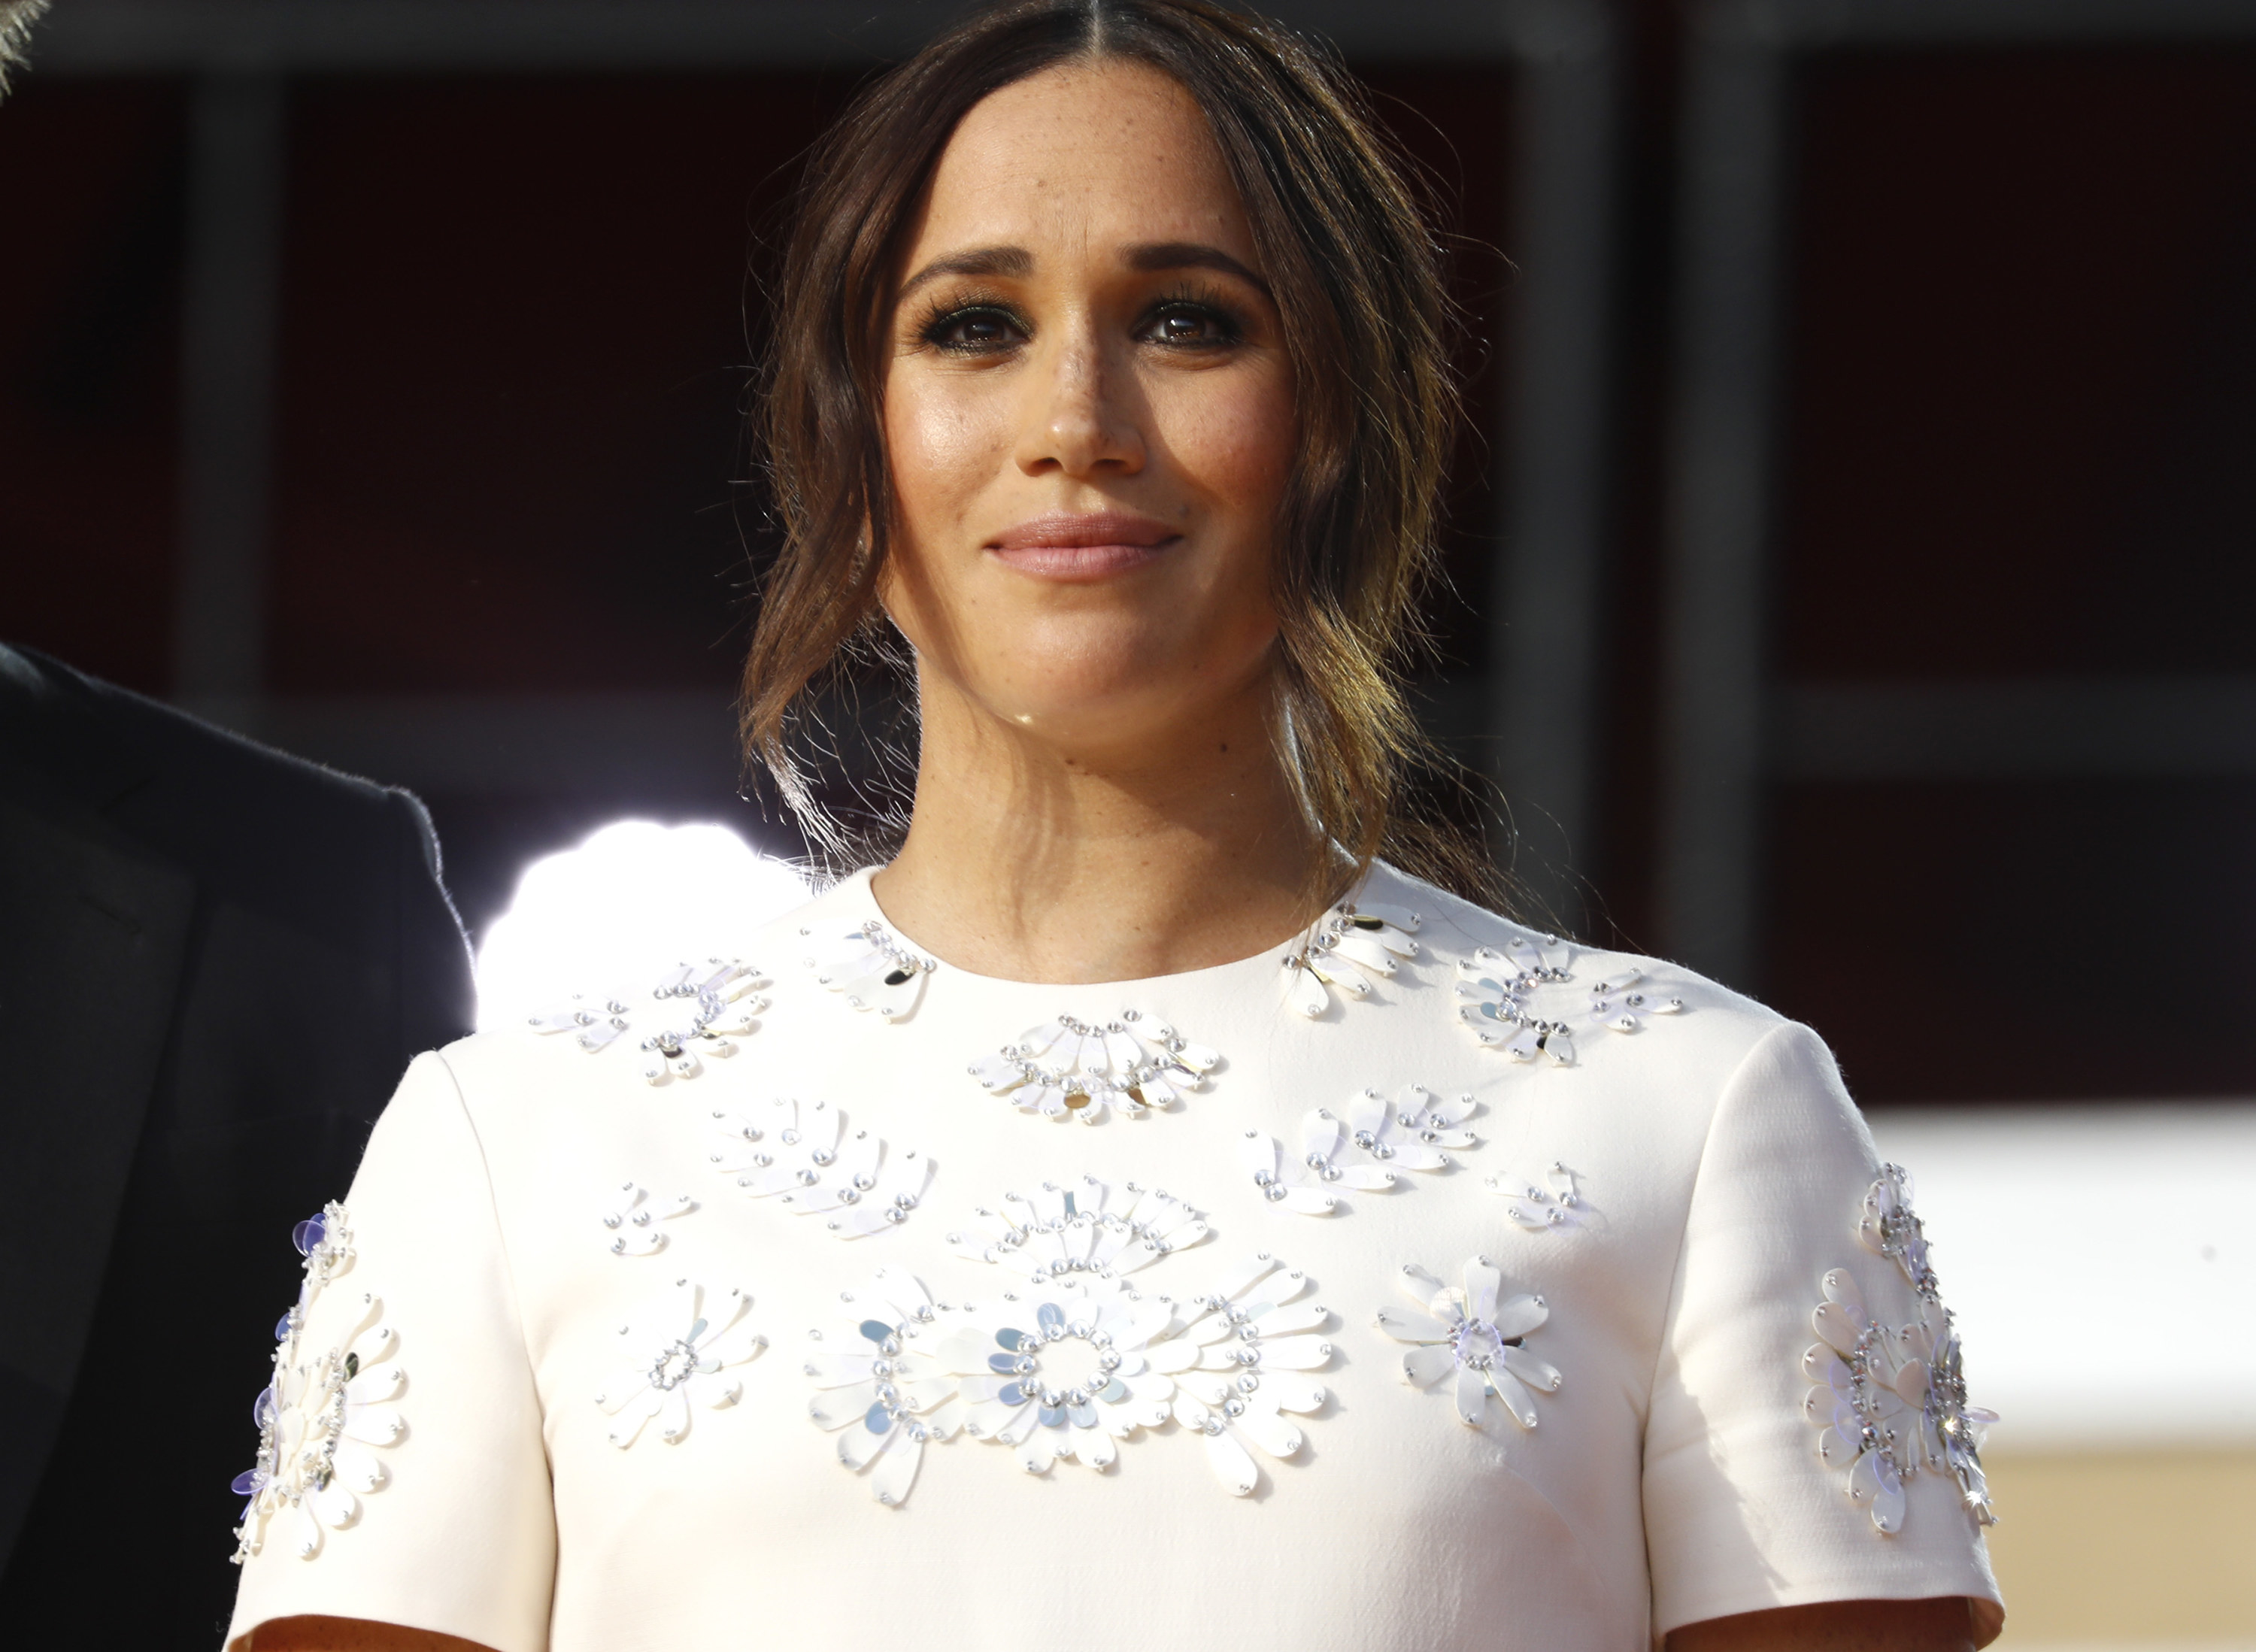 Meghan wears a white top with a circular pattern